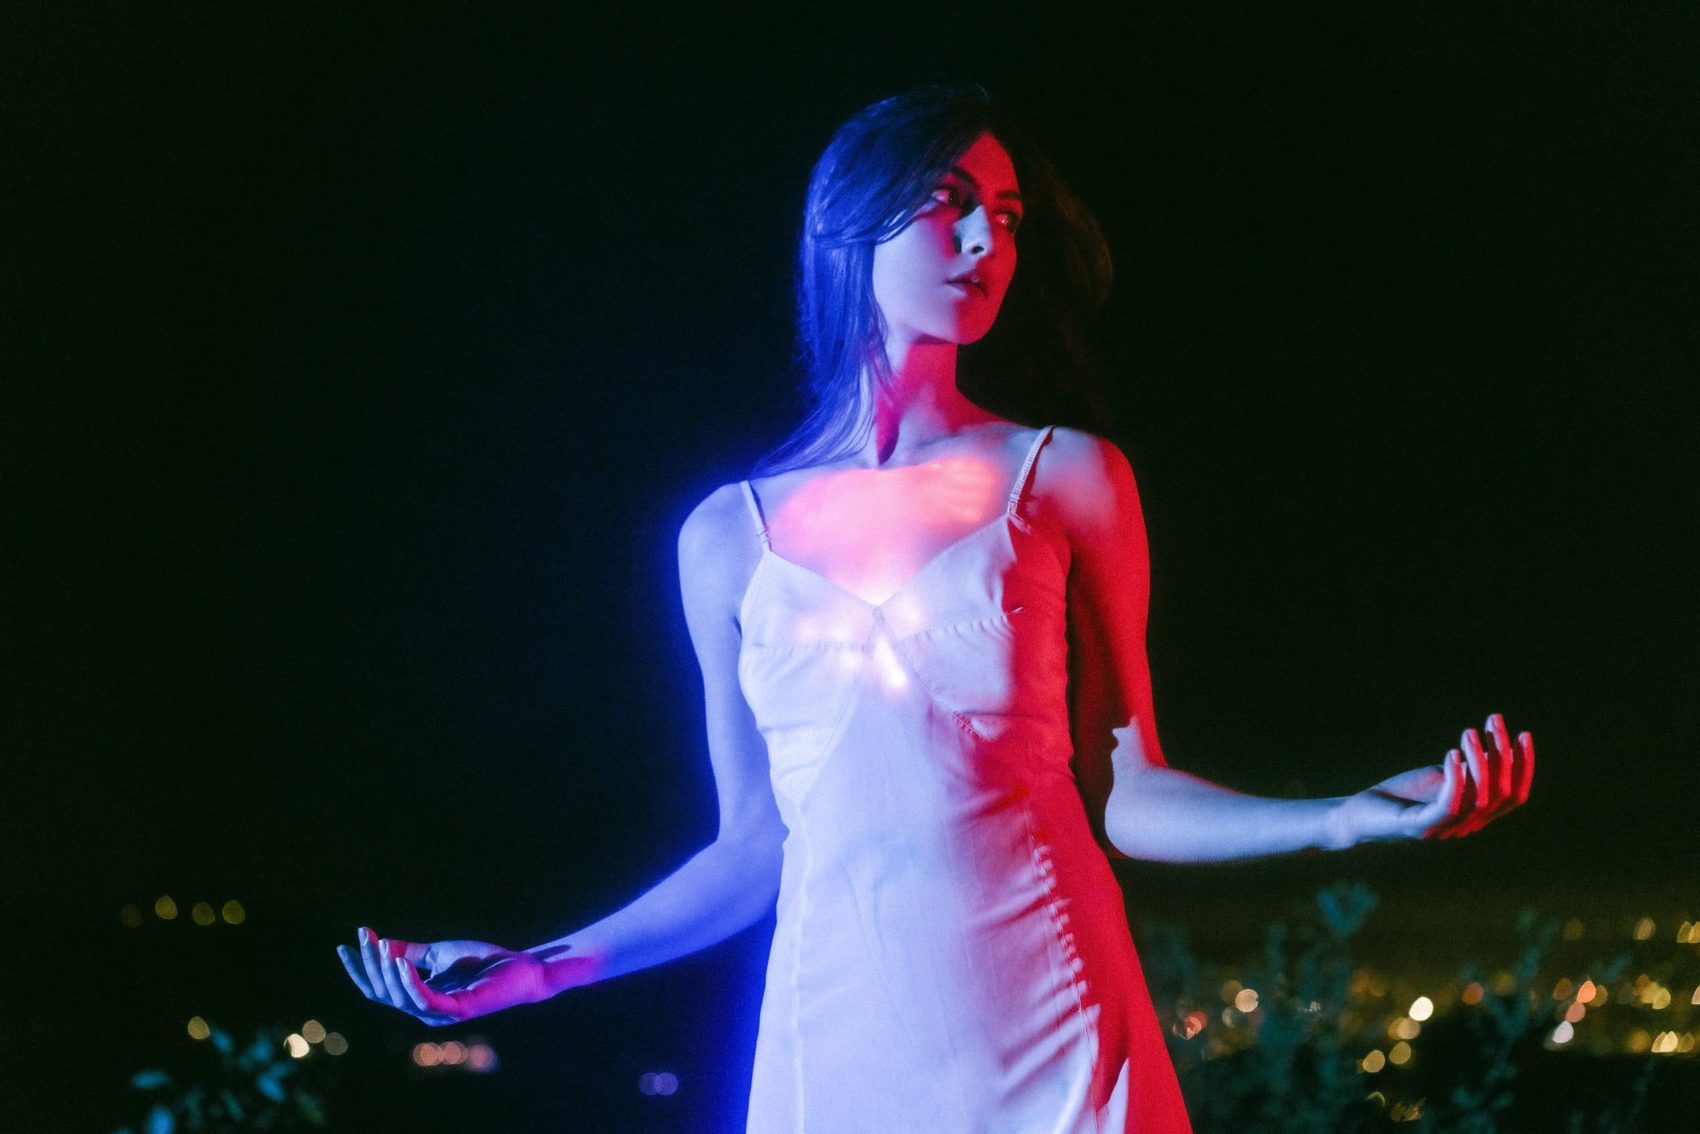 Photoshoot do álbum "Weyes Blood And in the Darkness, Hearts Aglow"